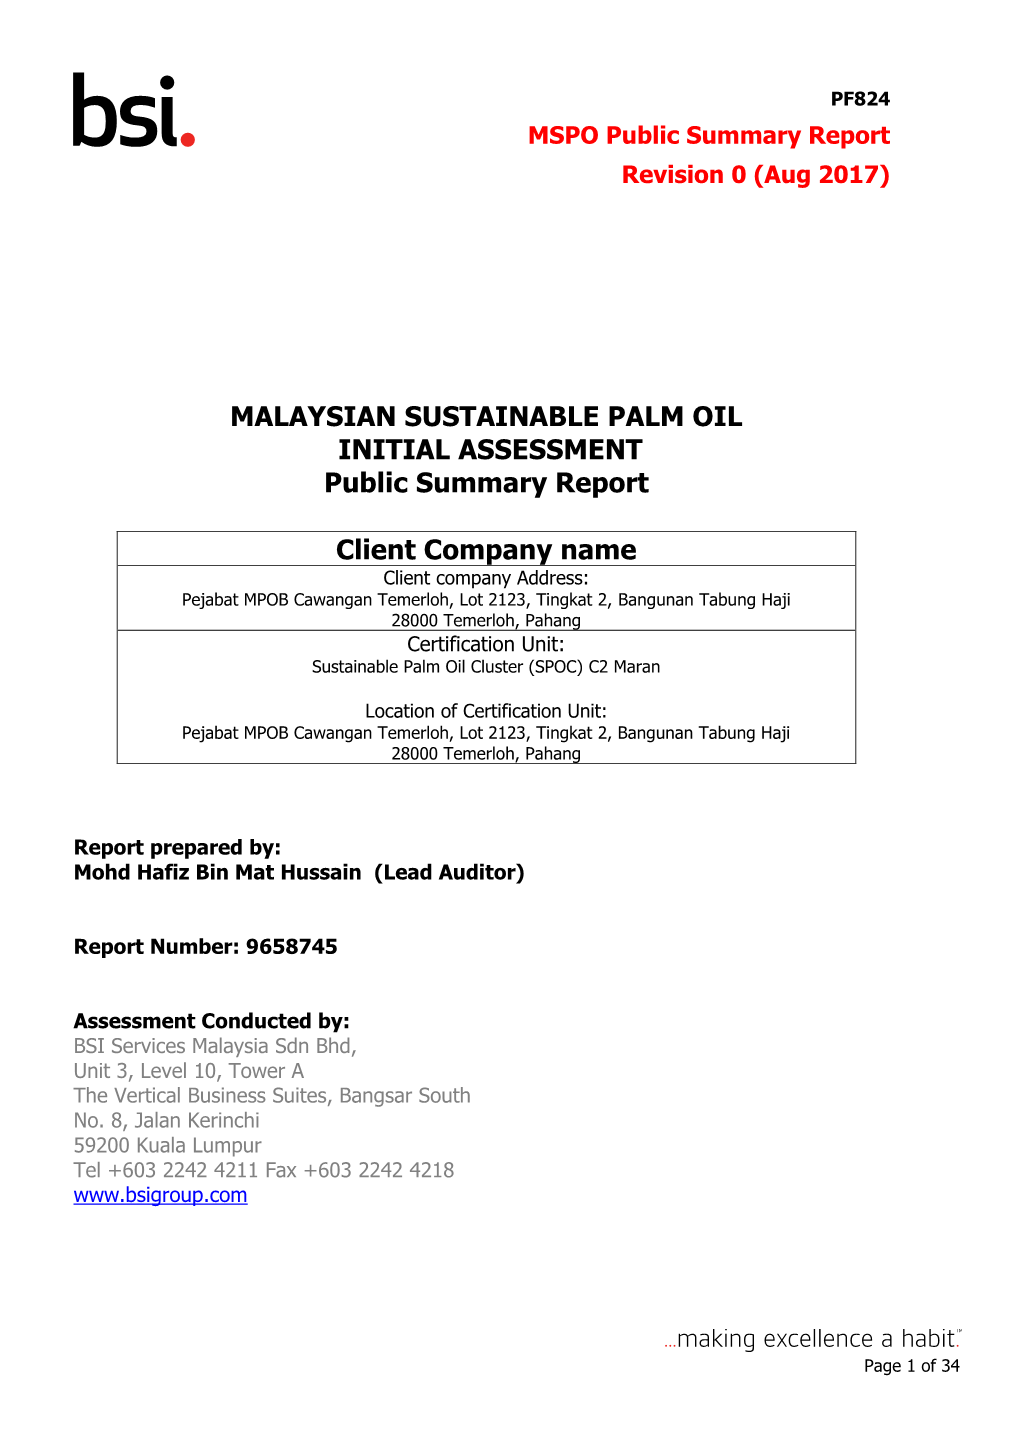 Sustainable Palm Oil Cluster Maran (C2)